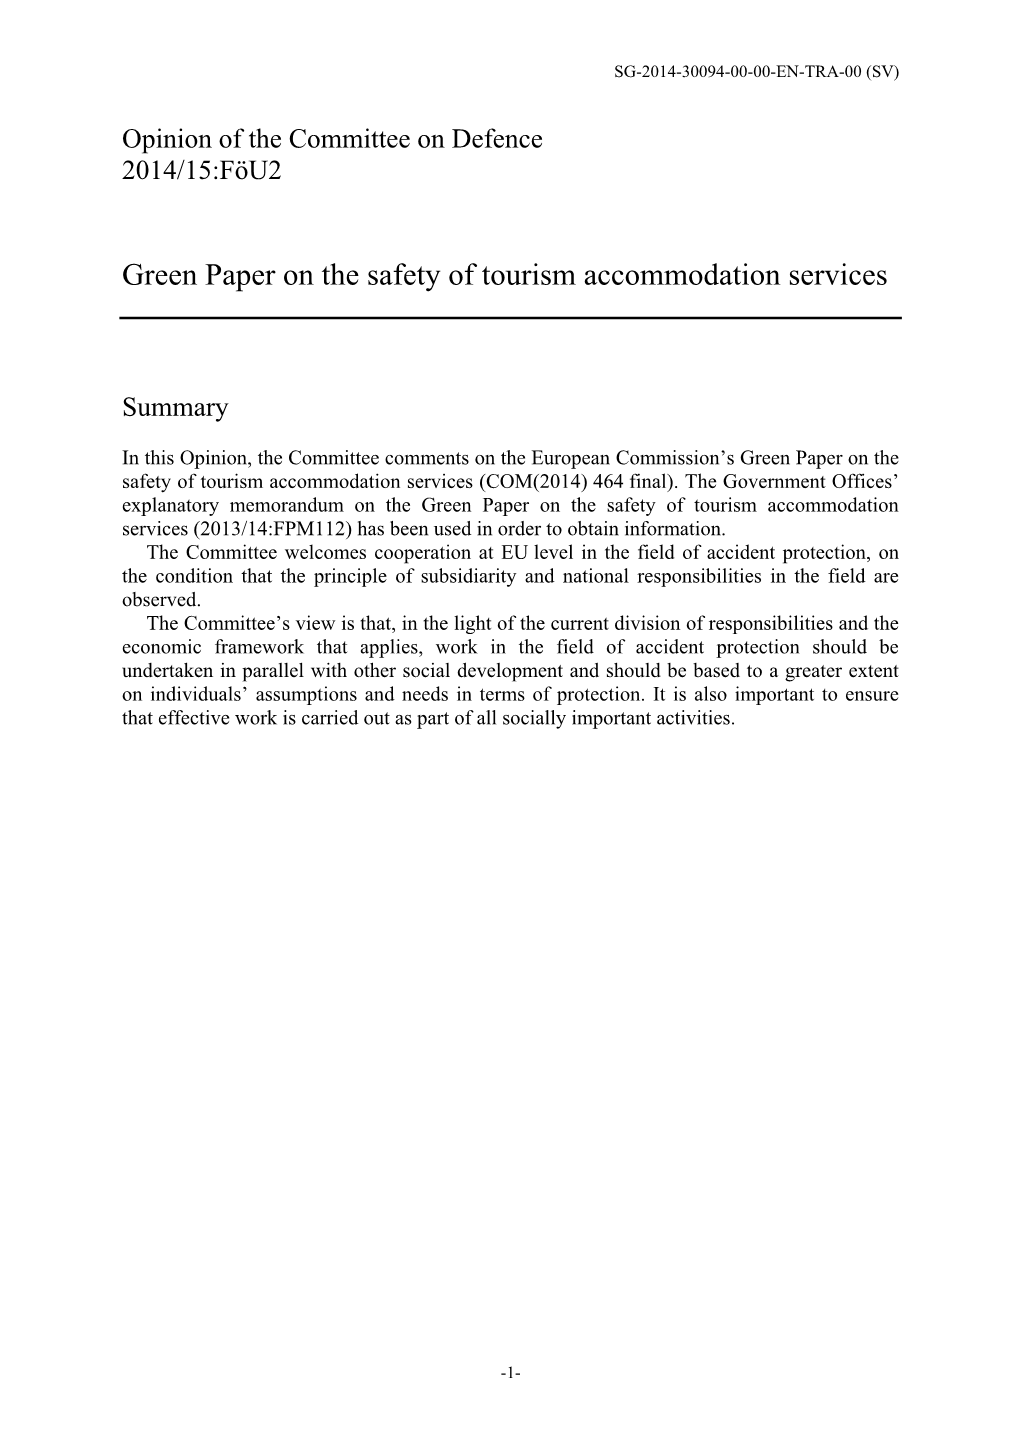 Green Paper on the Safety of Tourism Accommodation Services